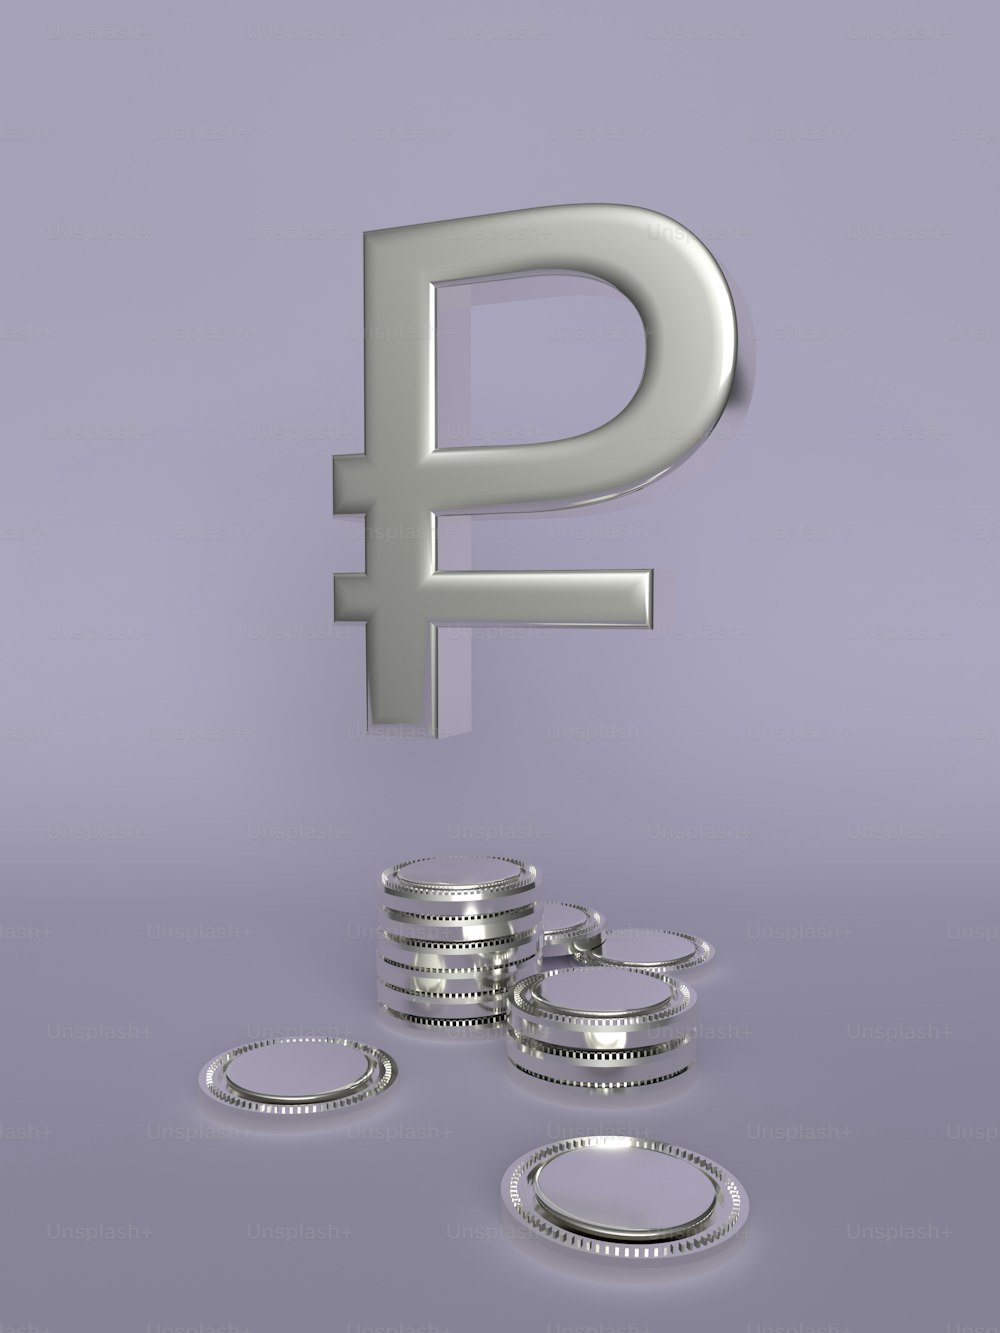 a pile of silver coins sitting next to a pound sign